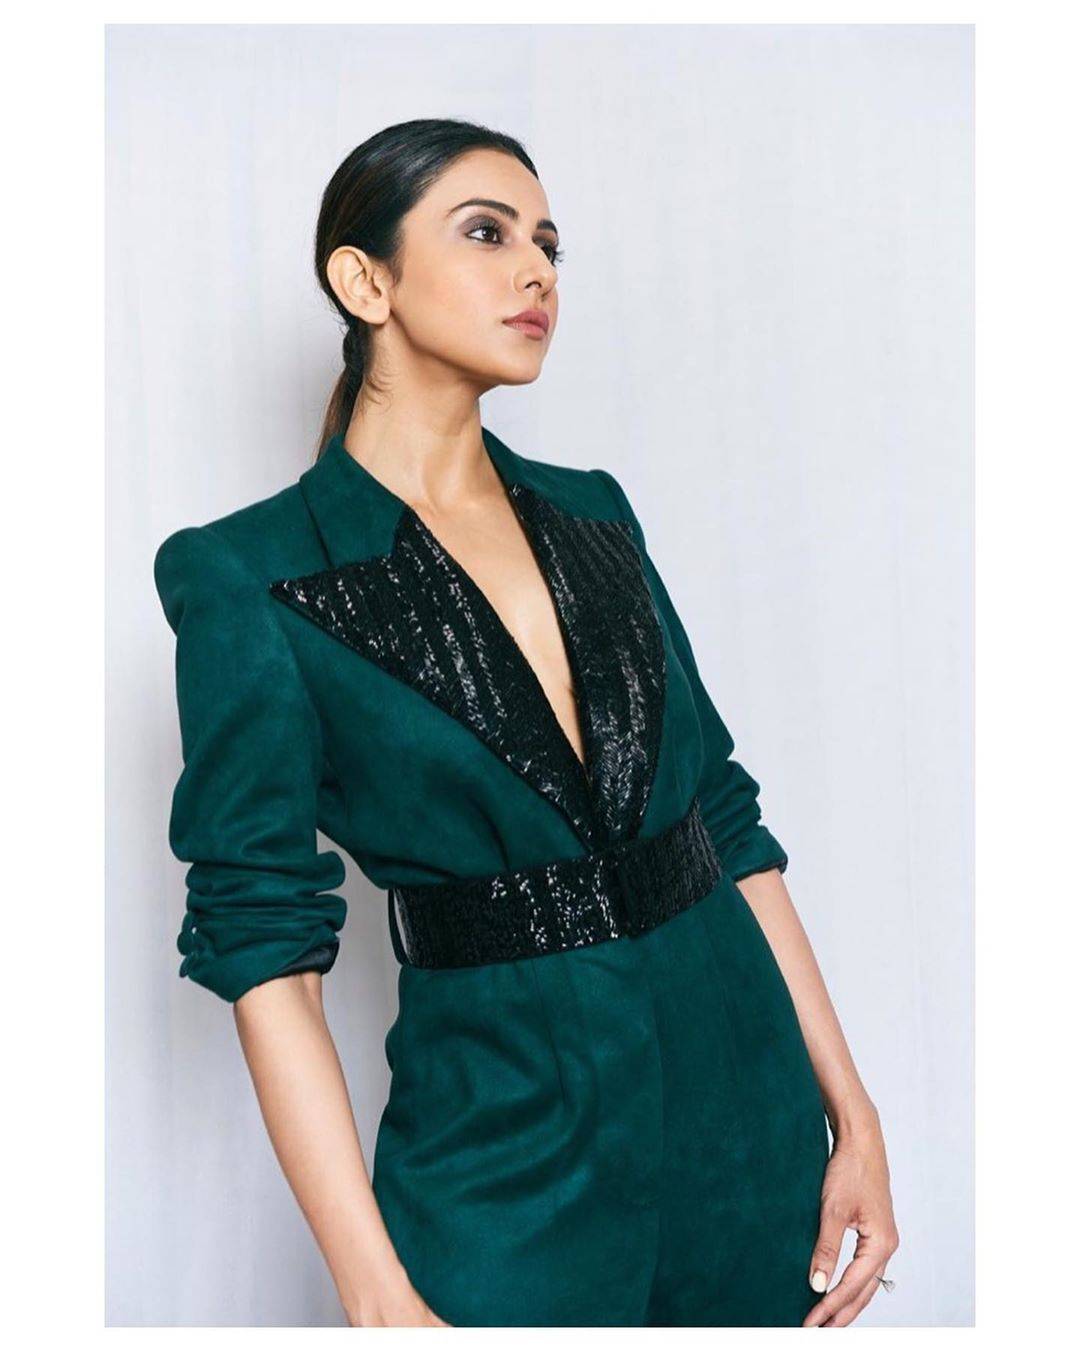 The jumpsuit from Nauman Piyarji has the waist and wide lapels in black sequins and the NGK actor wore no shirt underneath  - Fashion Models